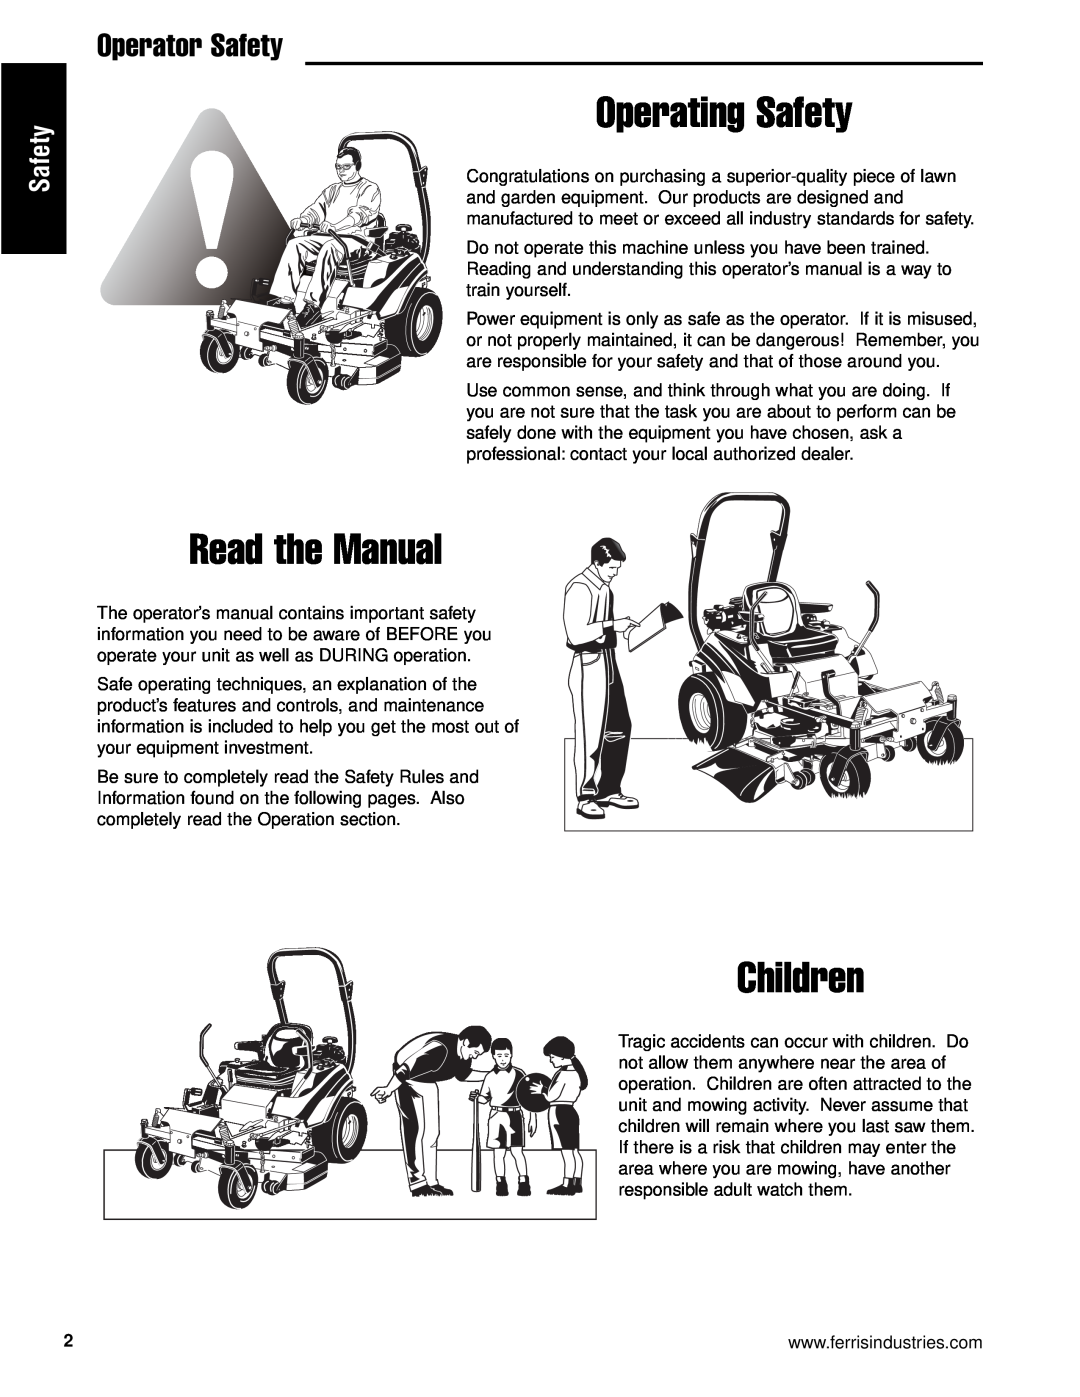 Briggs & Stratton 5900718, 5901186, 5901183, 5901184, 5900717 Operating Safety, Read the Manual, Children, Operator Safety 